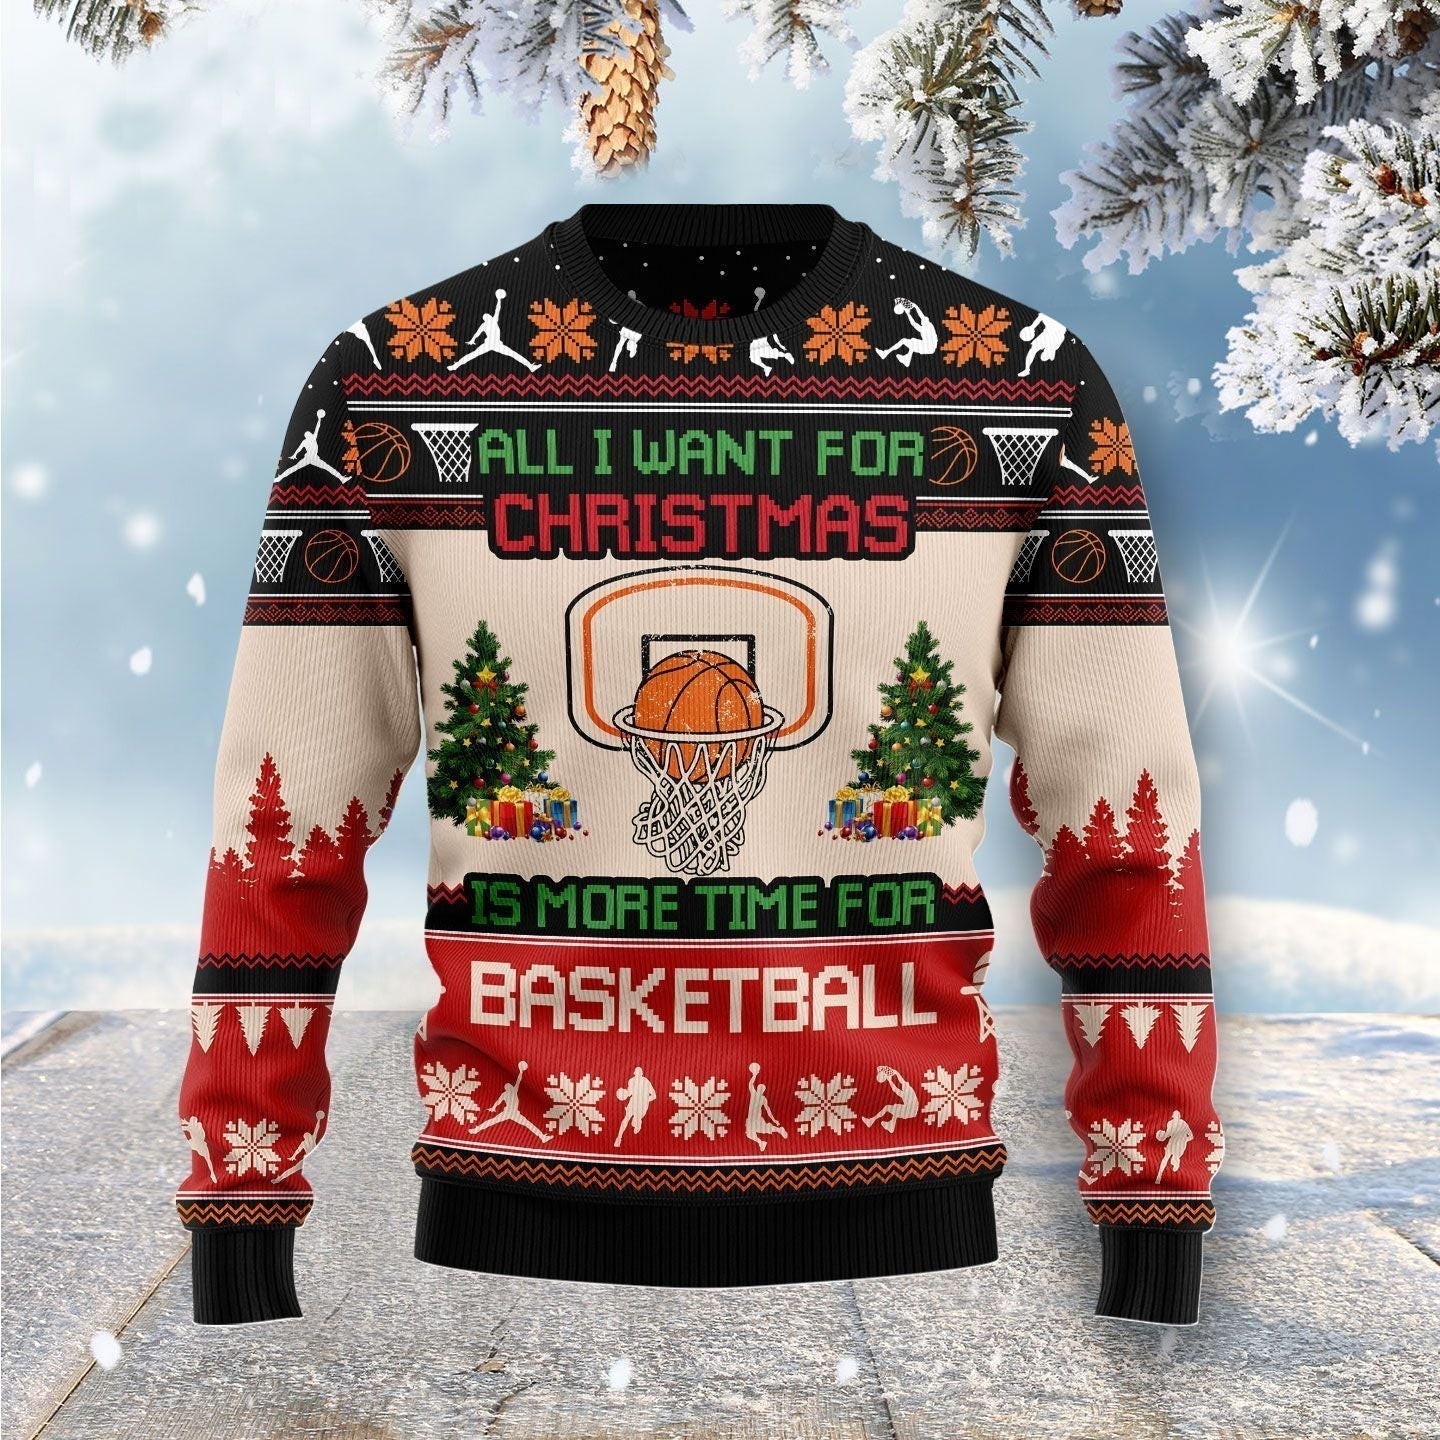 All I Want For Christmas Is More Time For Basketball Ugly Christmas Sweater Ugly Sweater For Men Women, Holiday Sweater